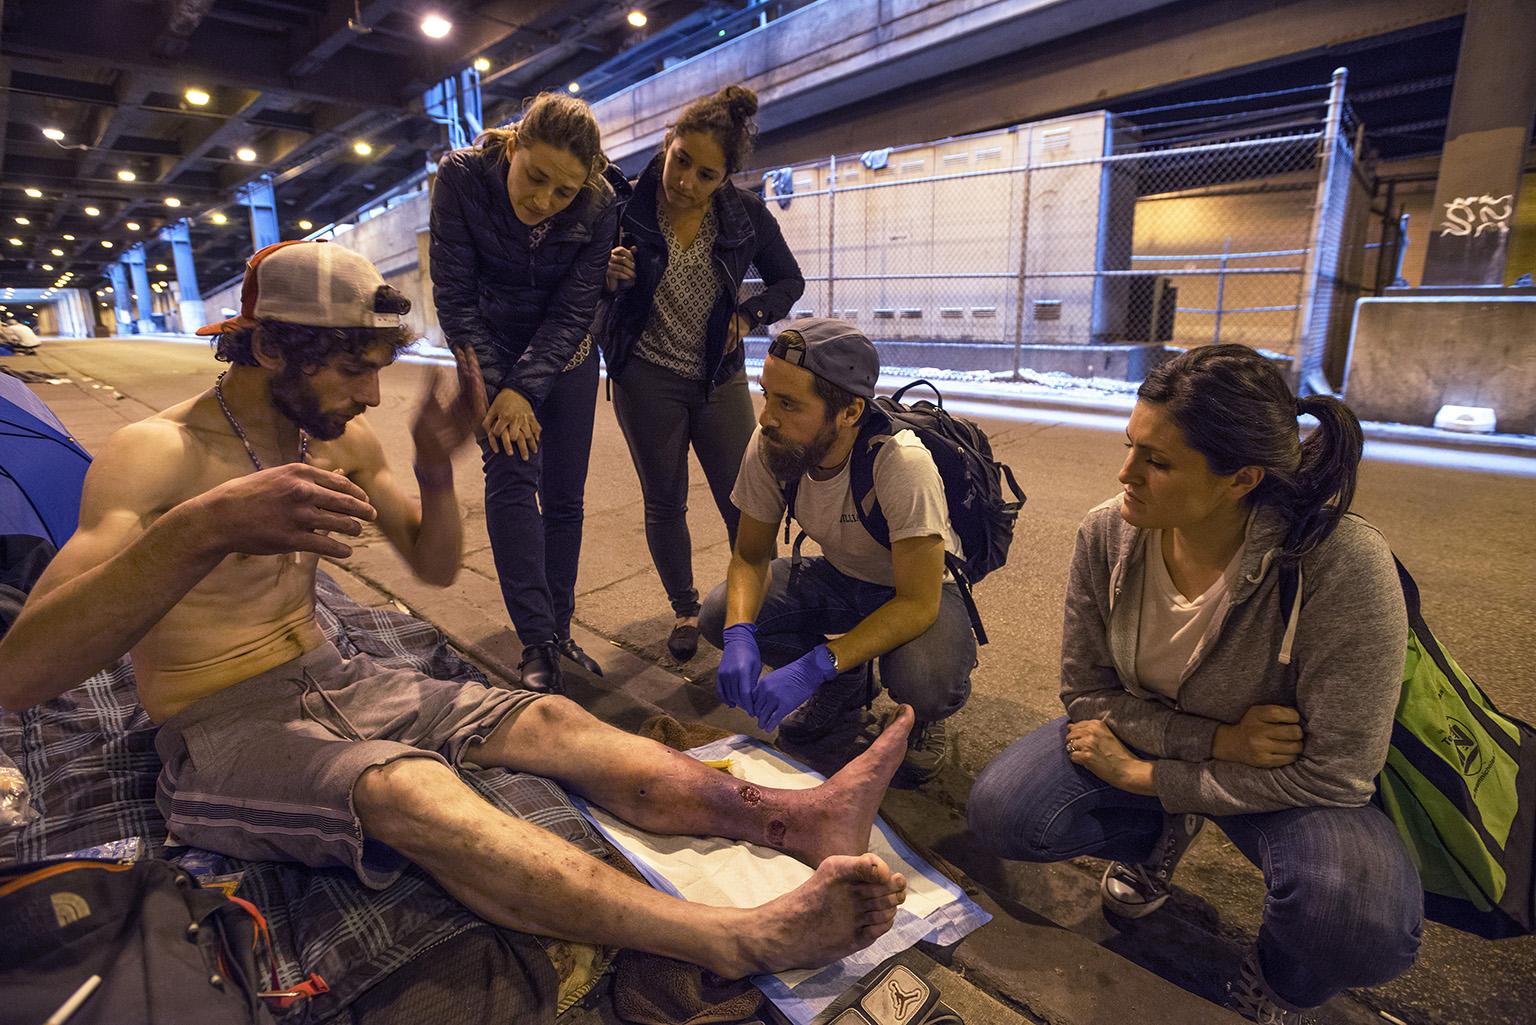 Members of Chicago Street Medicine deliver care to a man who is homeless. (Courtesy of Lloyd DeGrane Photography)